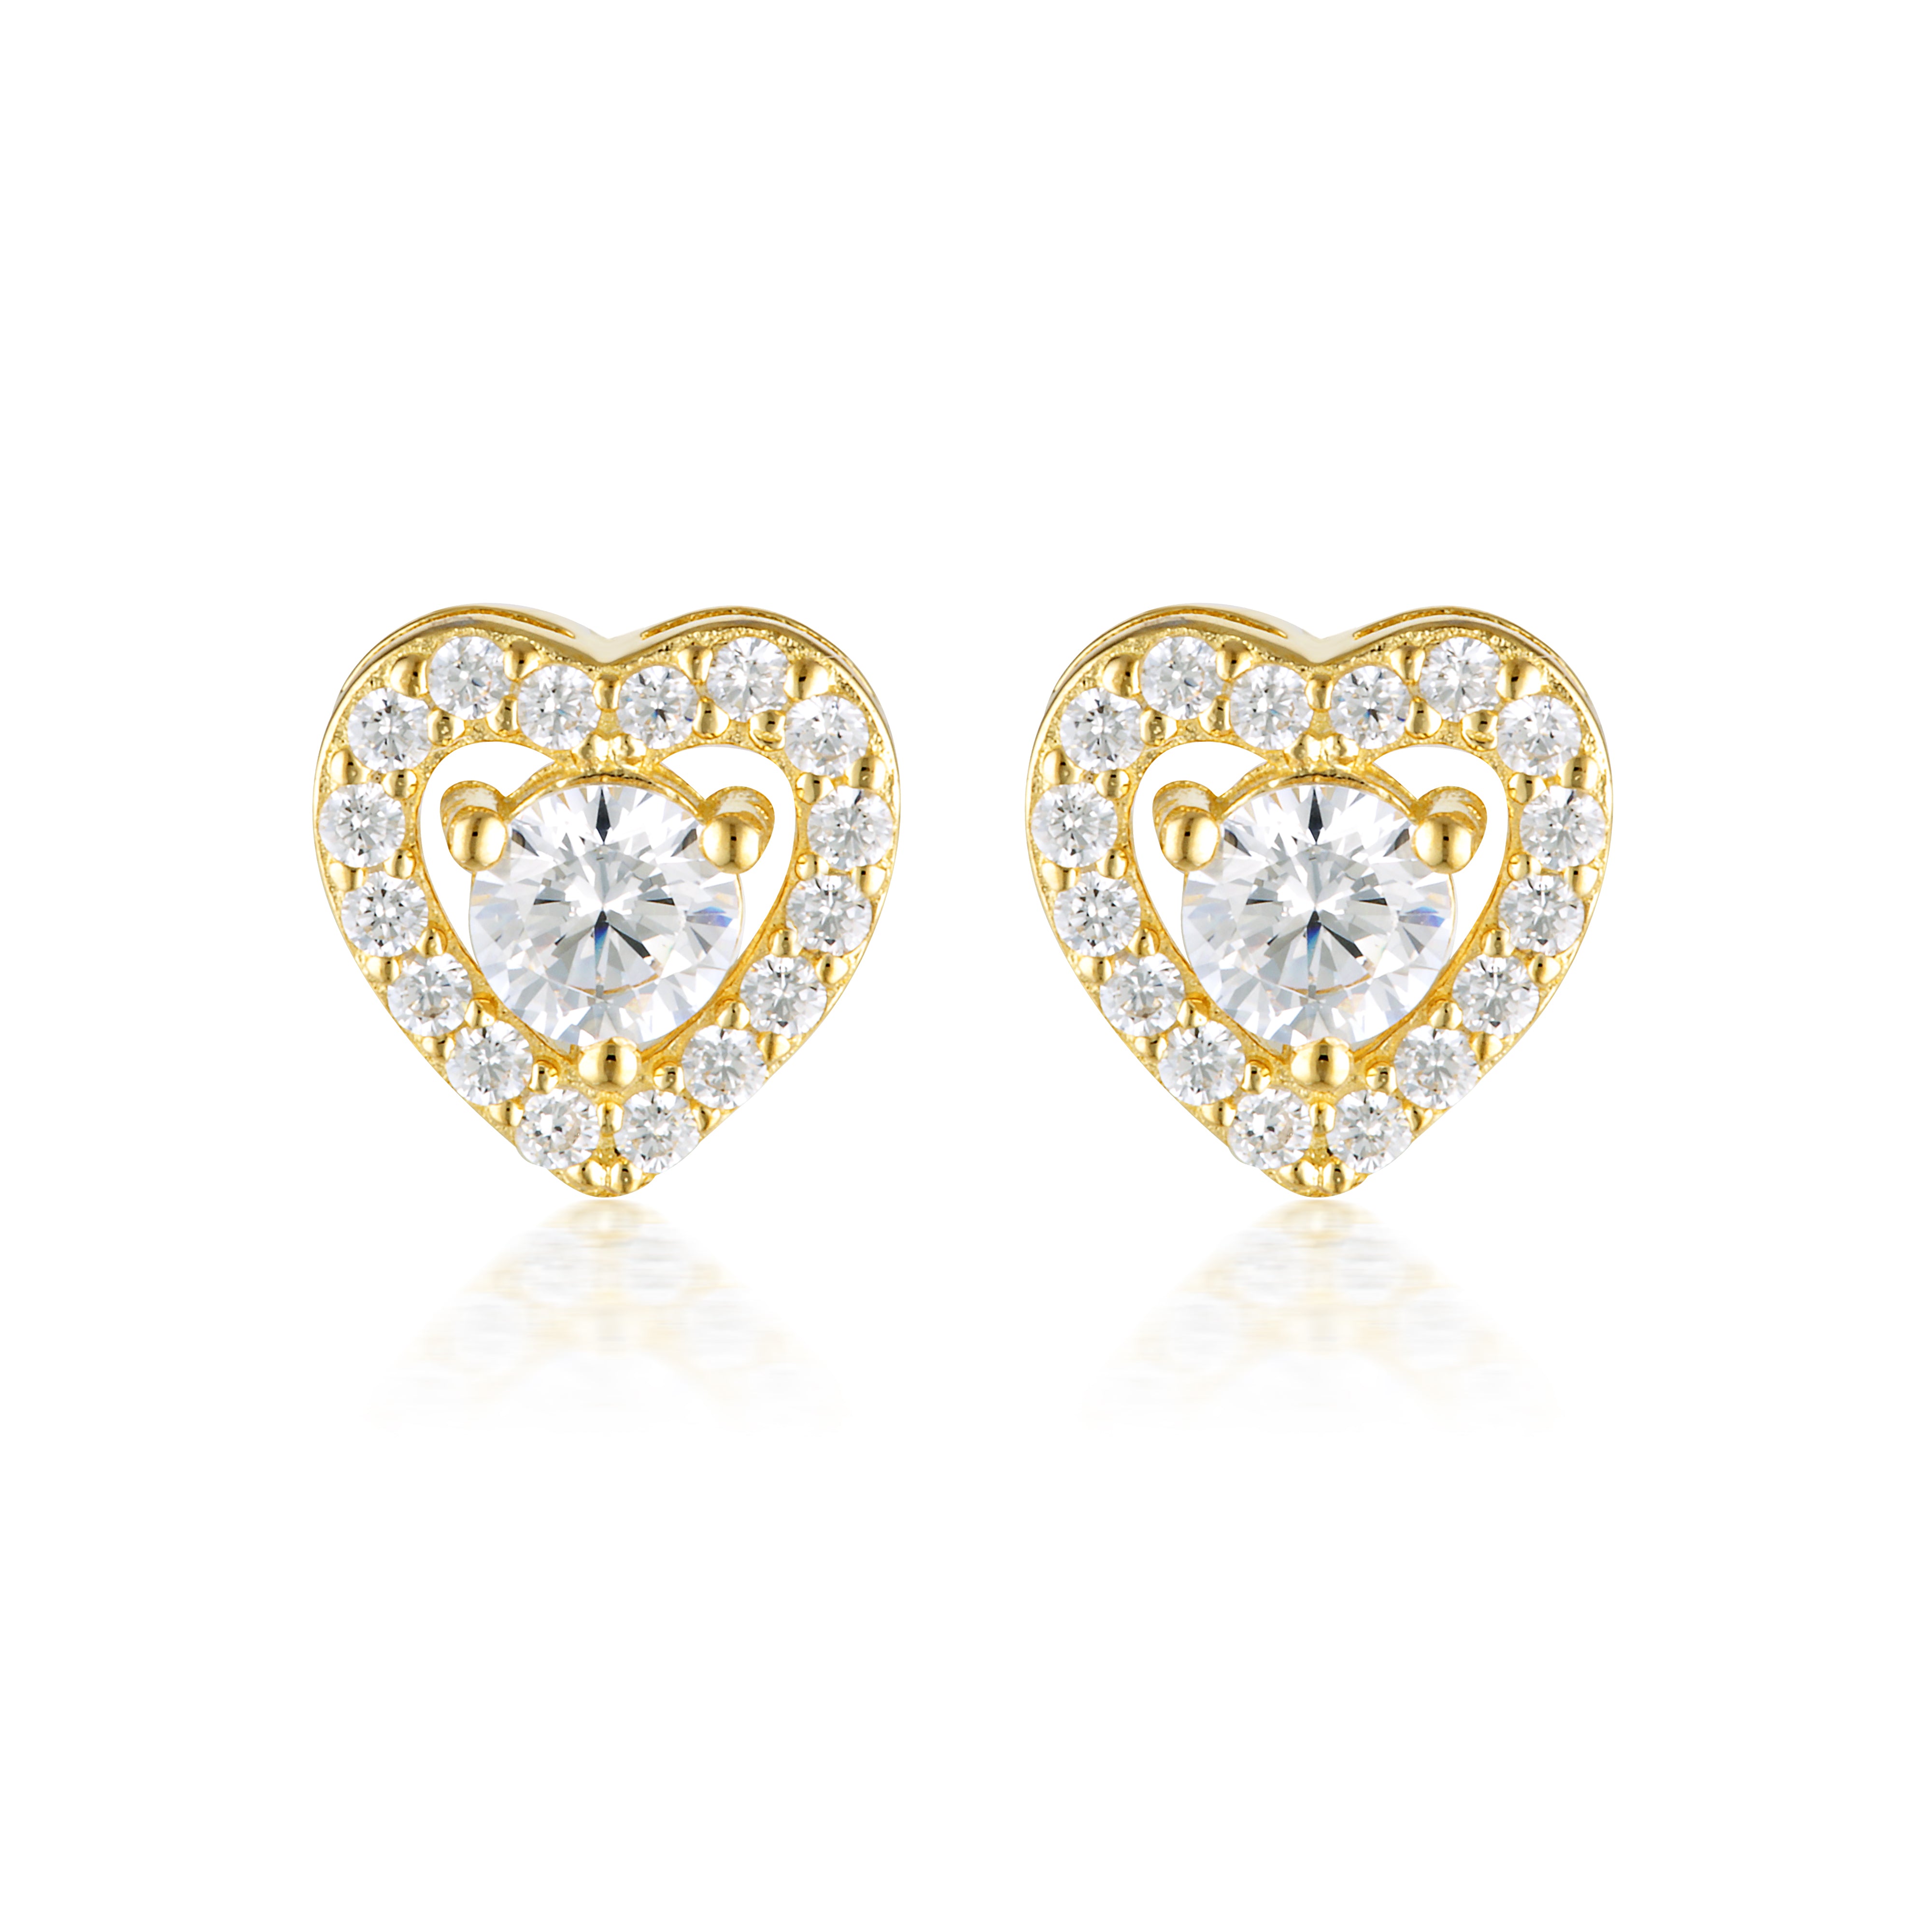 SIGNATURE SEALED WITH A KISS EARRINGS GOLD